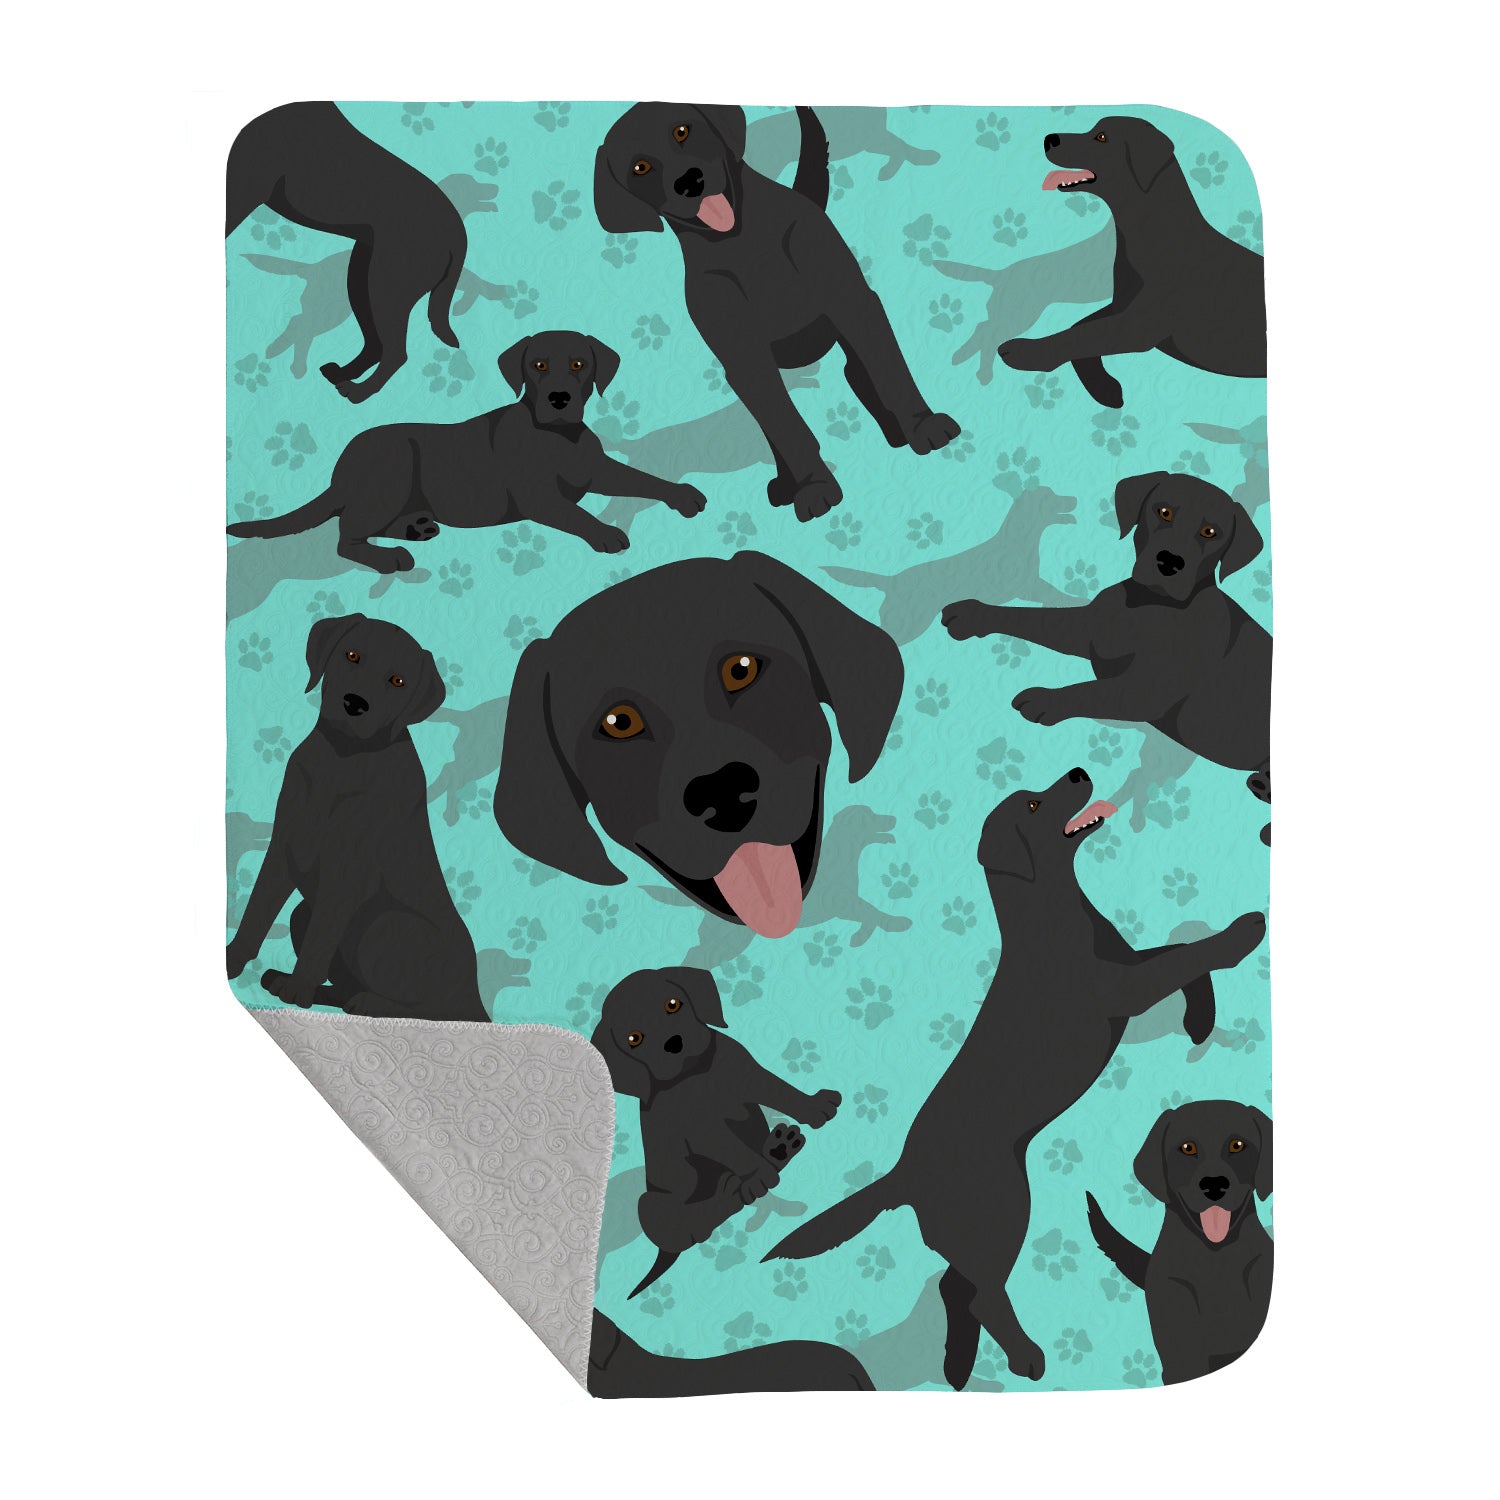 Buy this Black Labrador Retriever Quilted Blanket 50x60